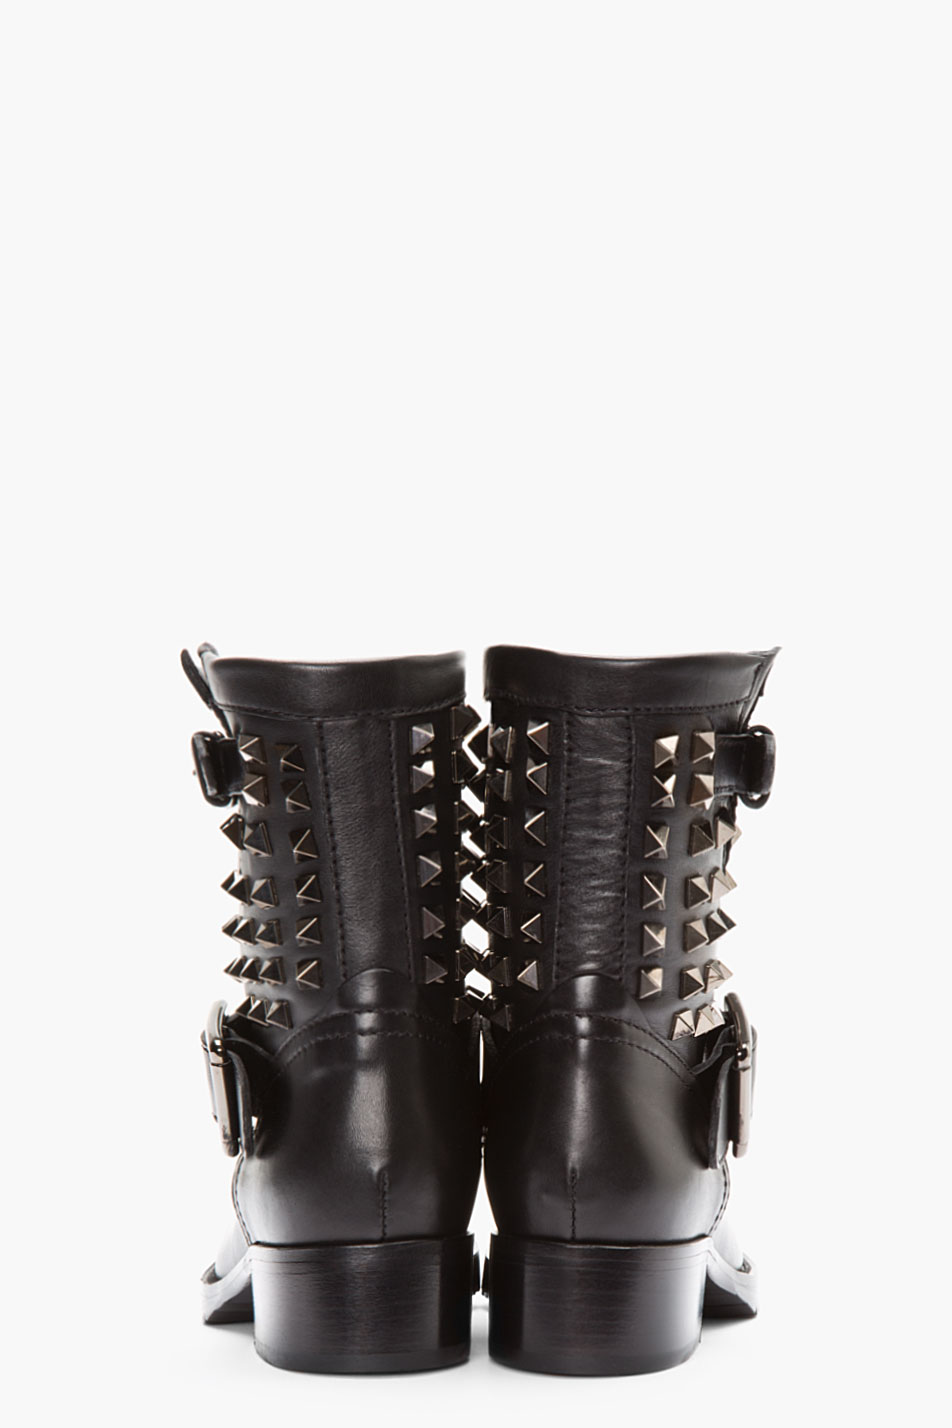 Valentino Black Studded Leather Biker Boots in Black | Lyst